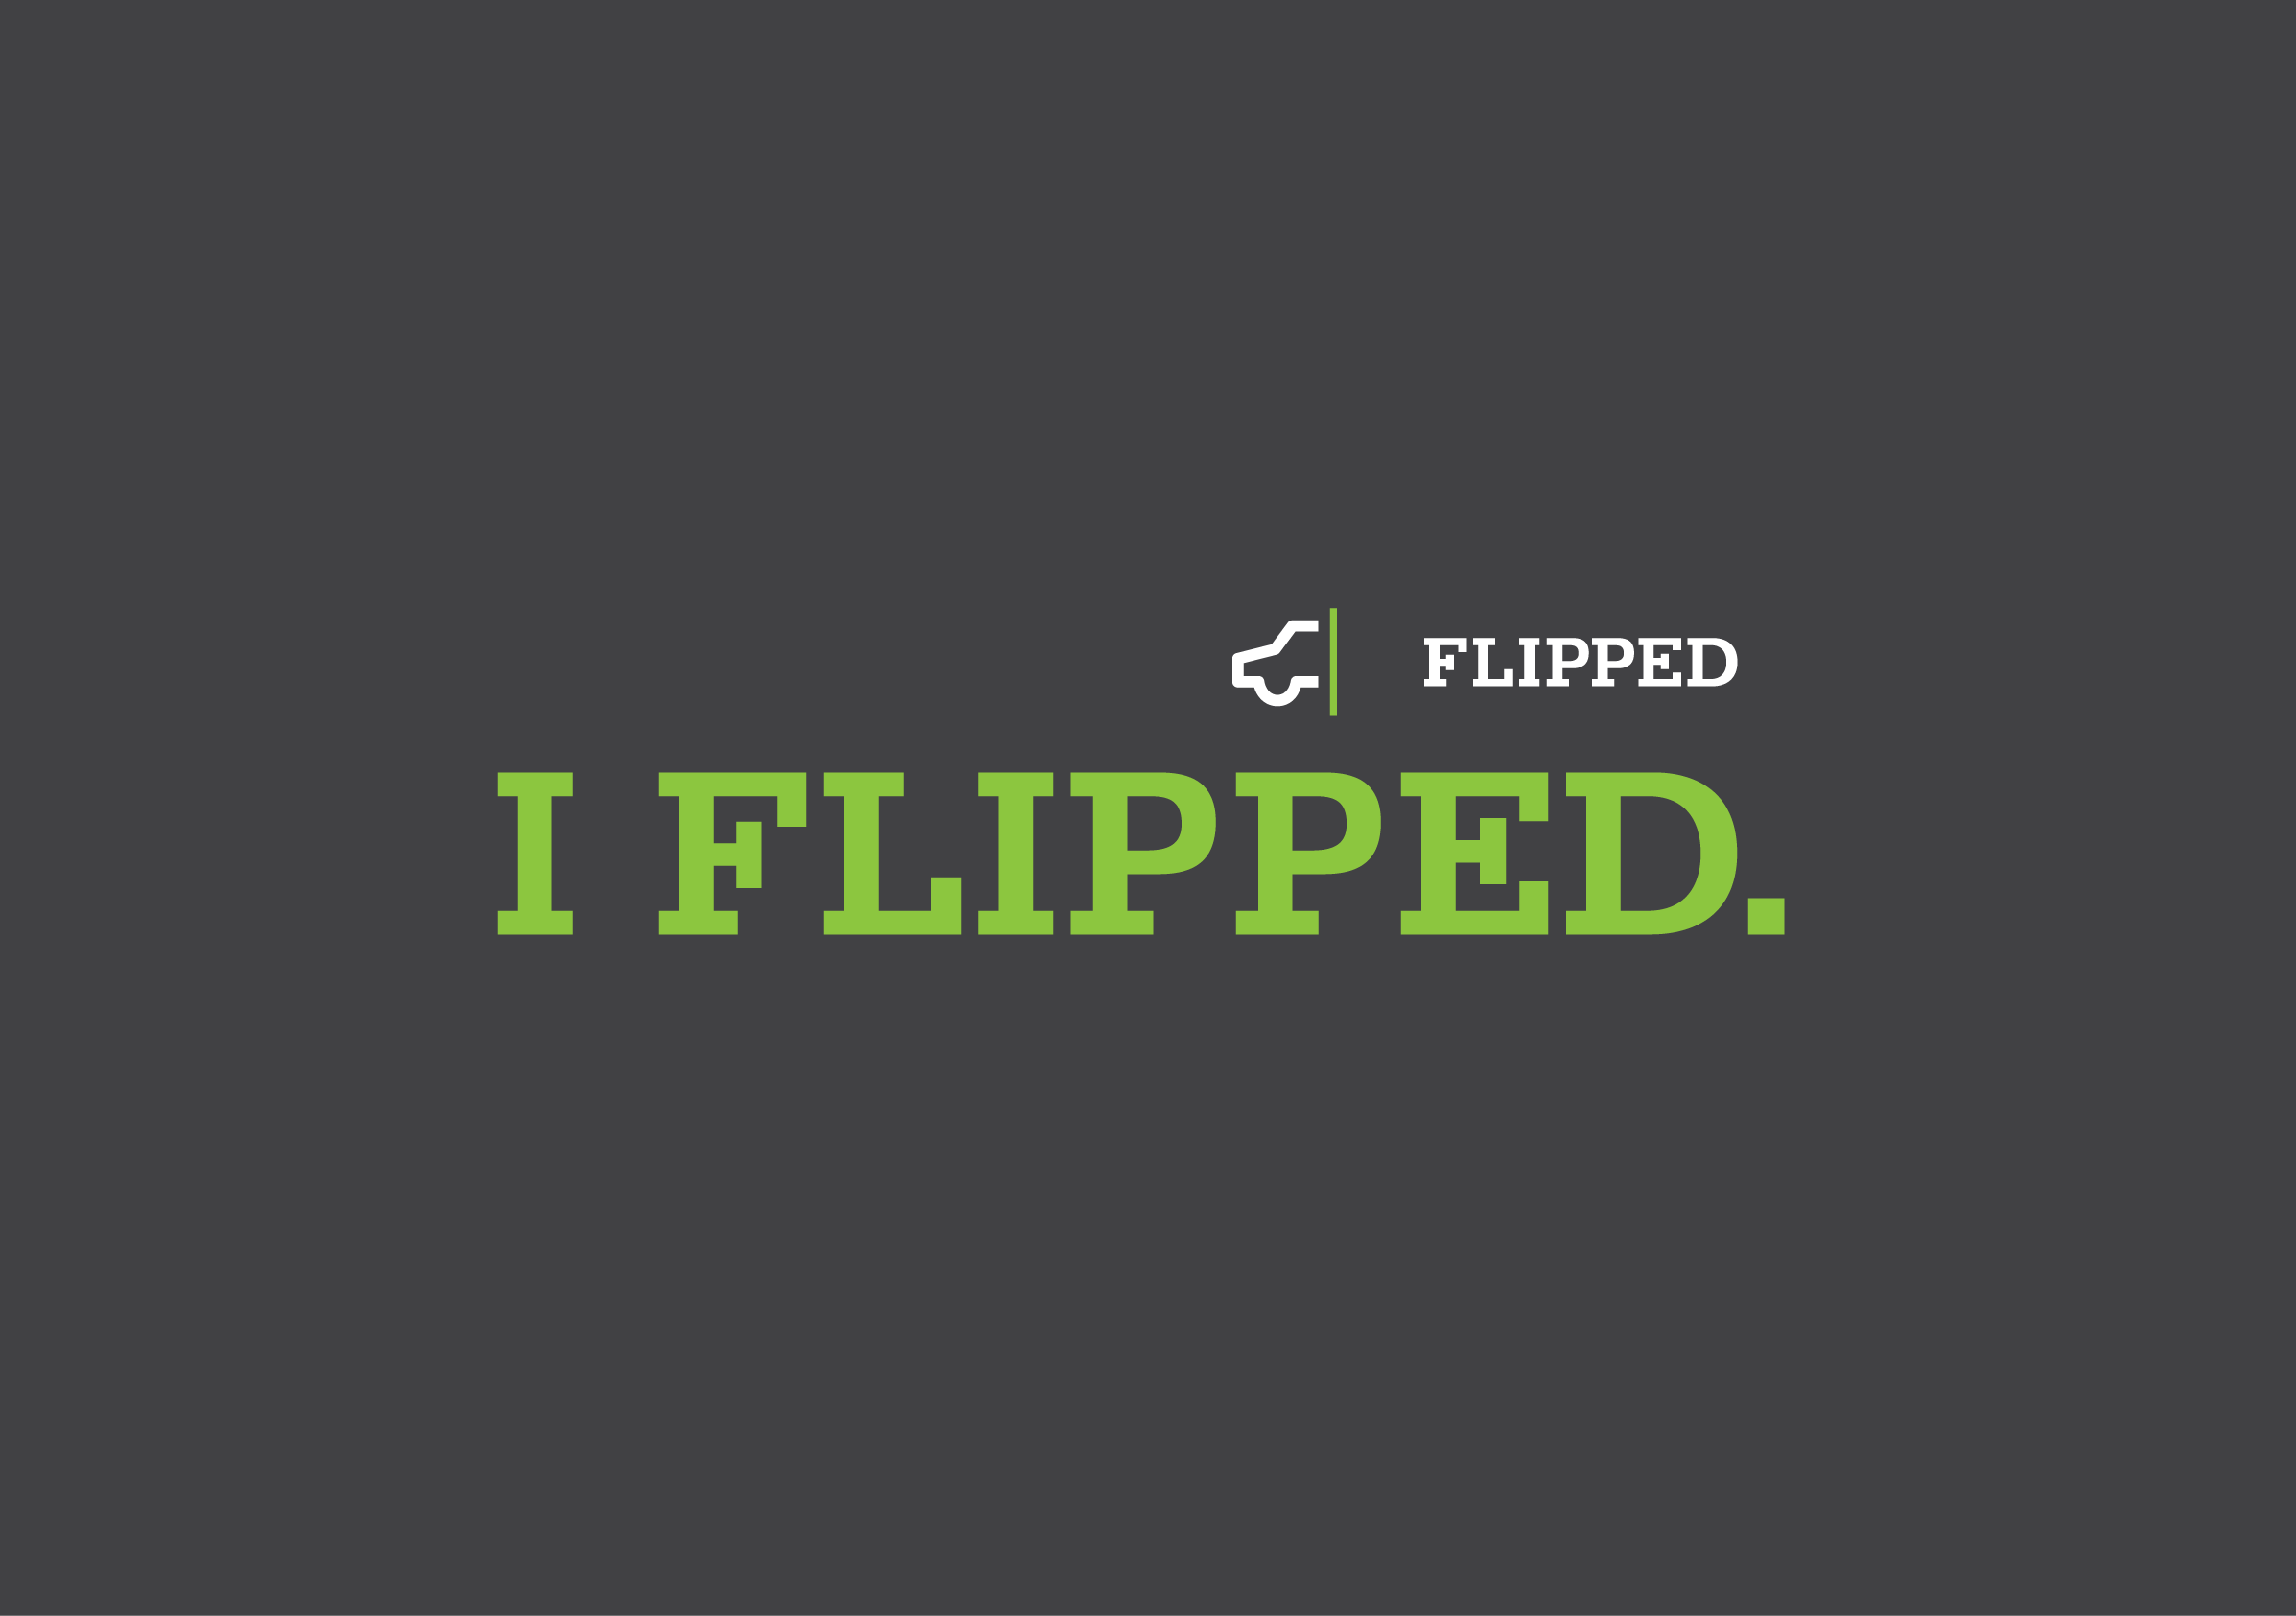 Headline for Flipped, an automobile sales company by Ottawa Graphic Designer idApostle